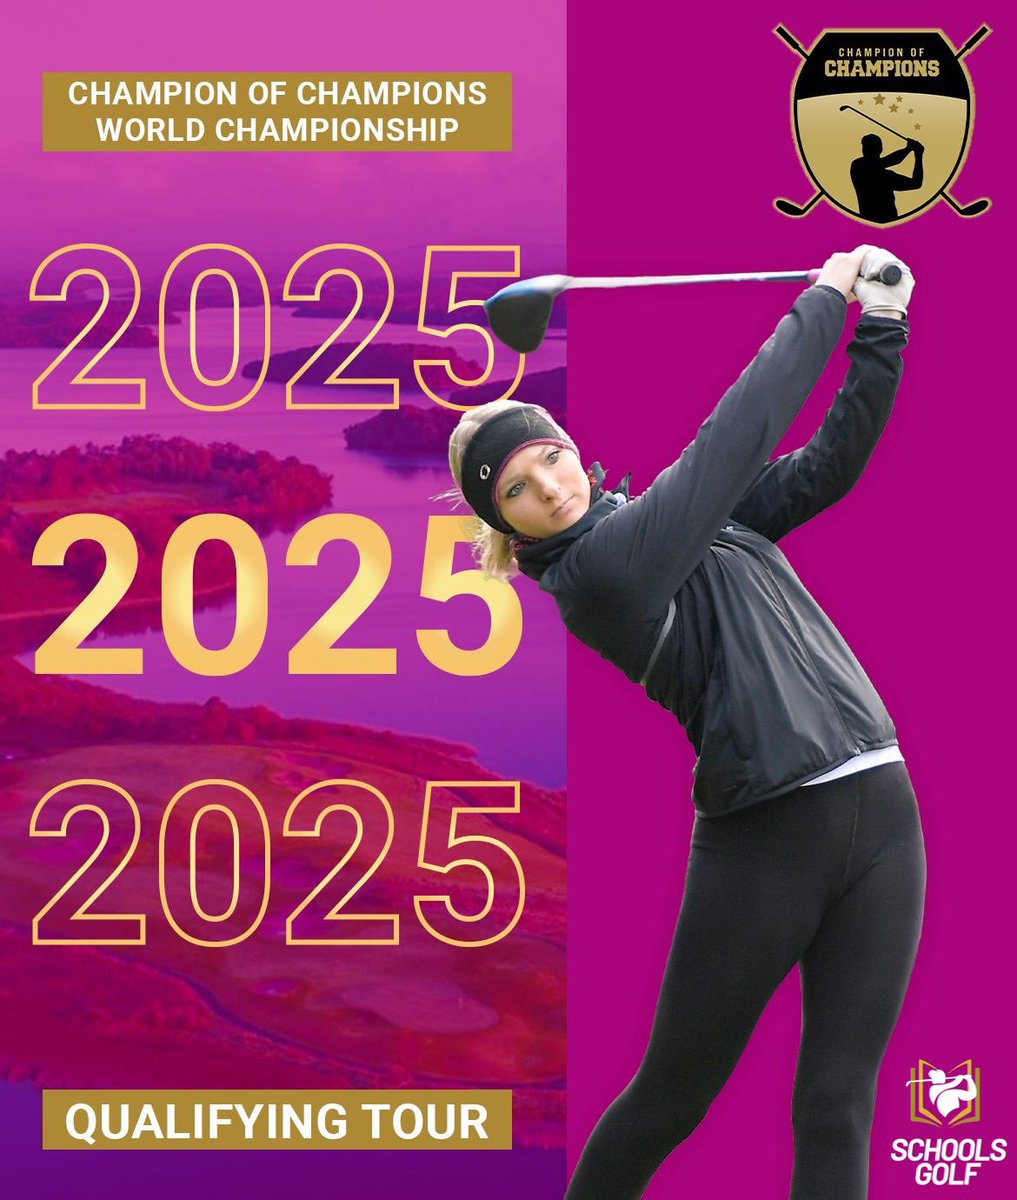 We are thrilled to announce that the Scratch winner at each one of our 2024 events across 4 countries will win an invite to the @Champ_Of_Champs World Final in 2025 The 2024 event sold out in 21 minutes with a field full of 250 champions from 40 countries @LoughErneResort